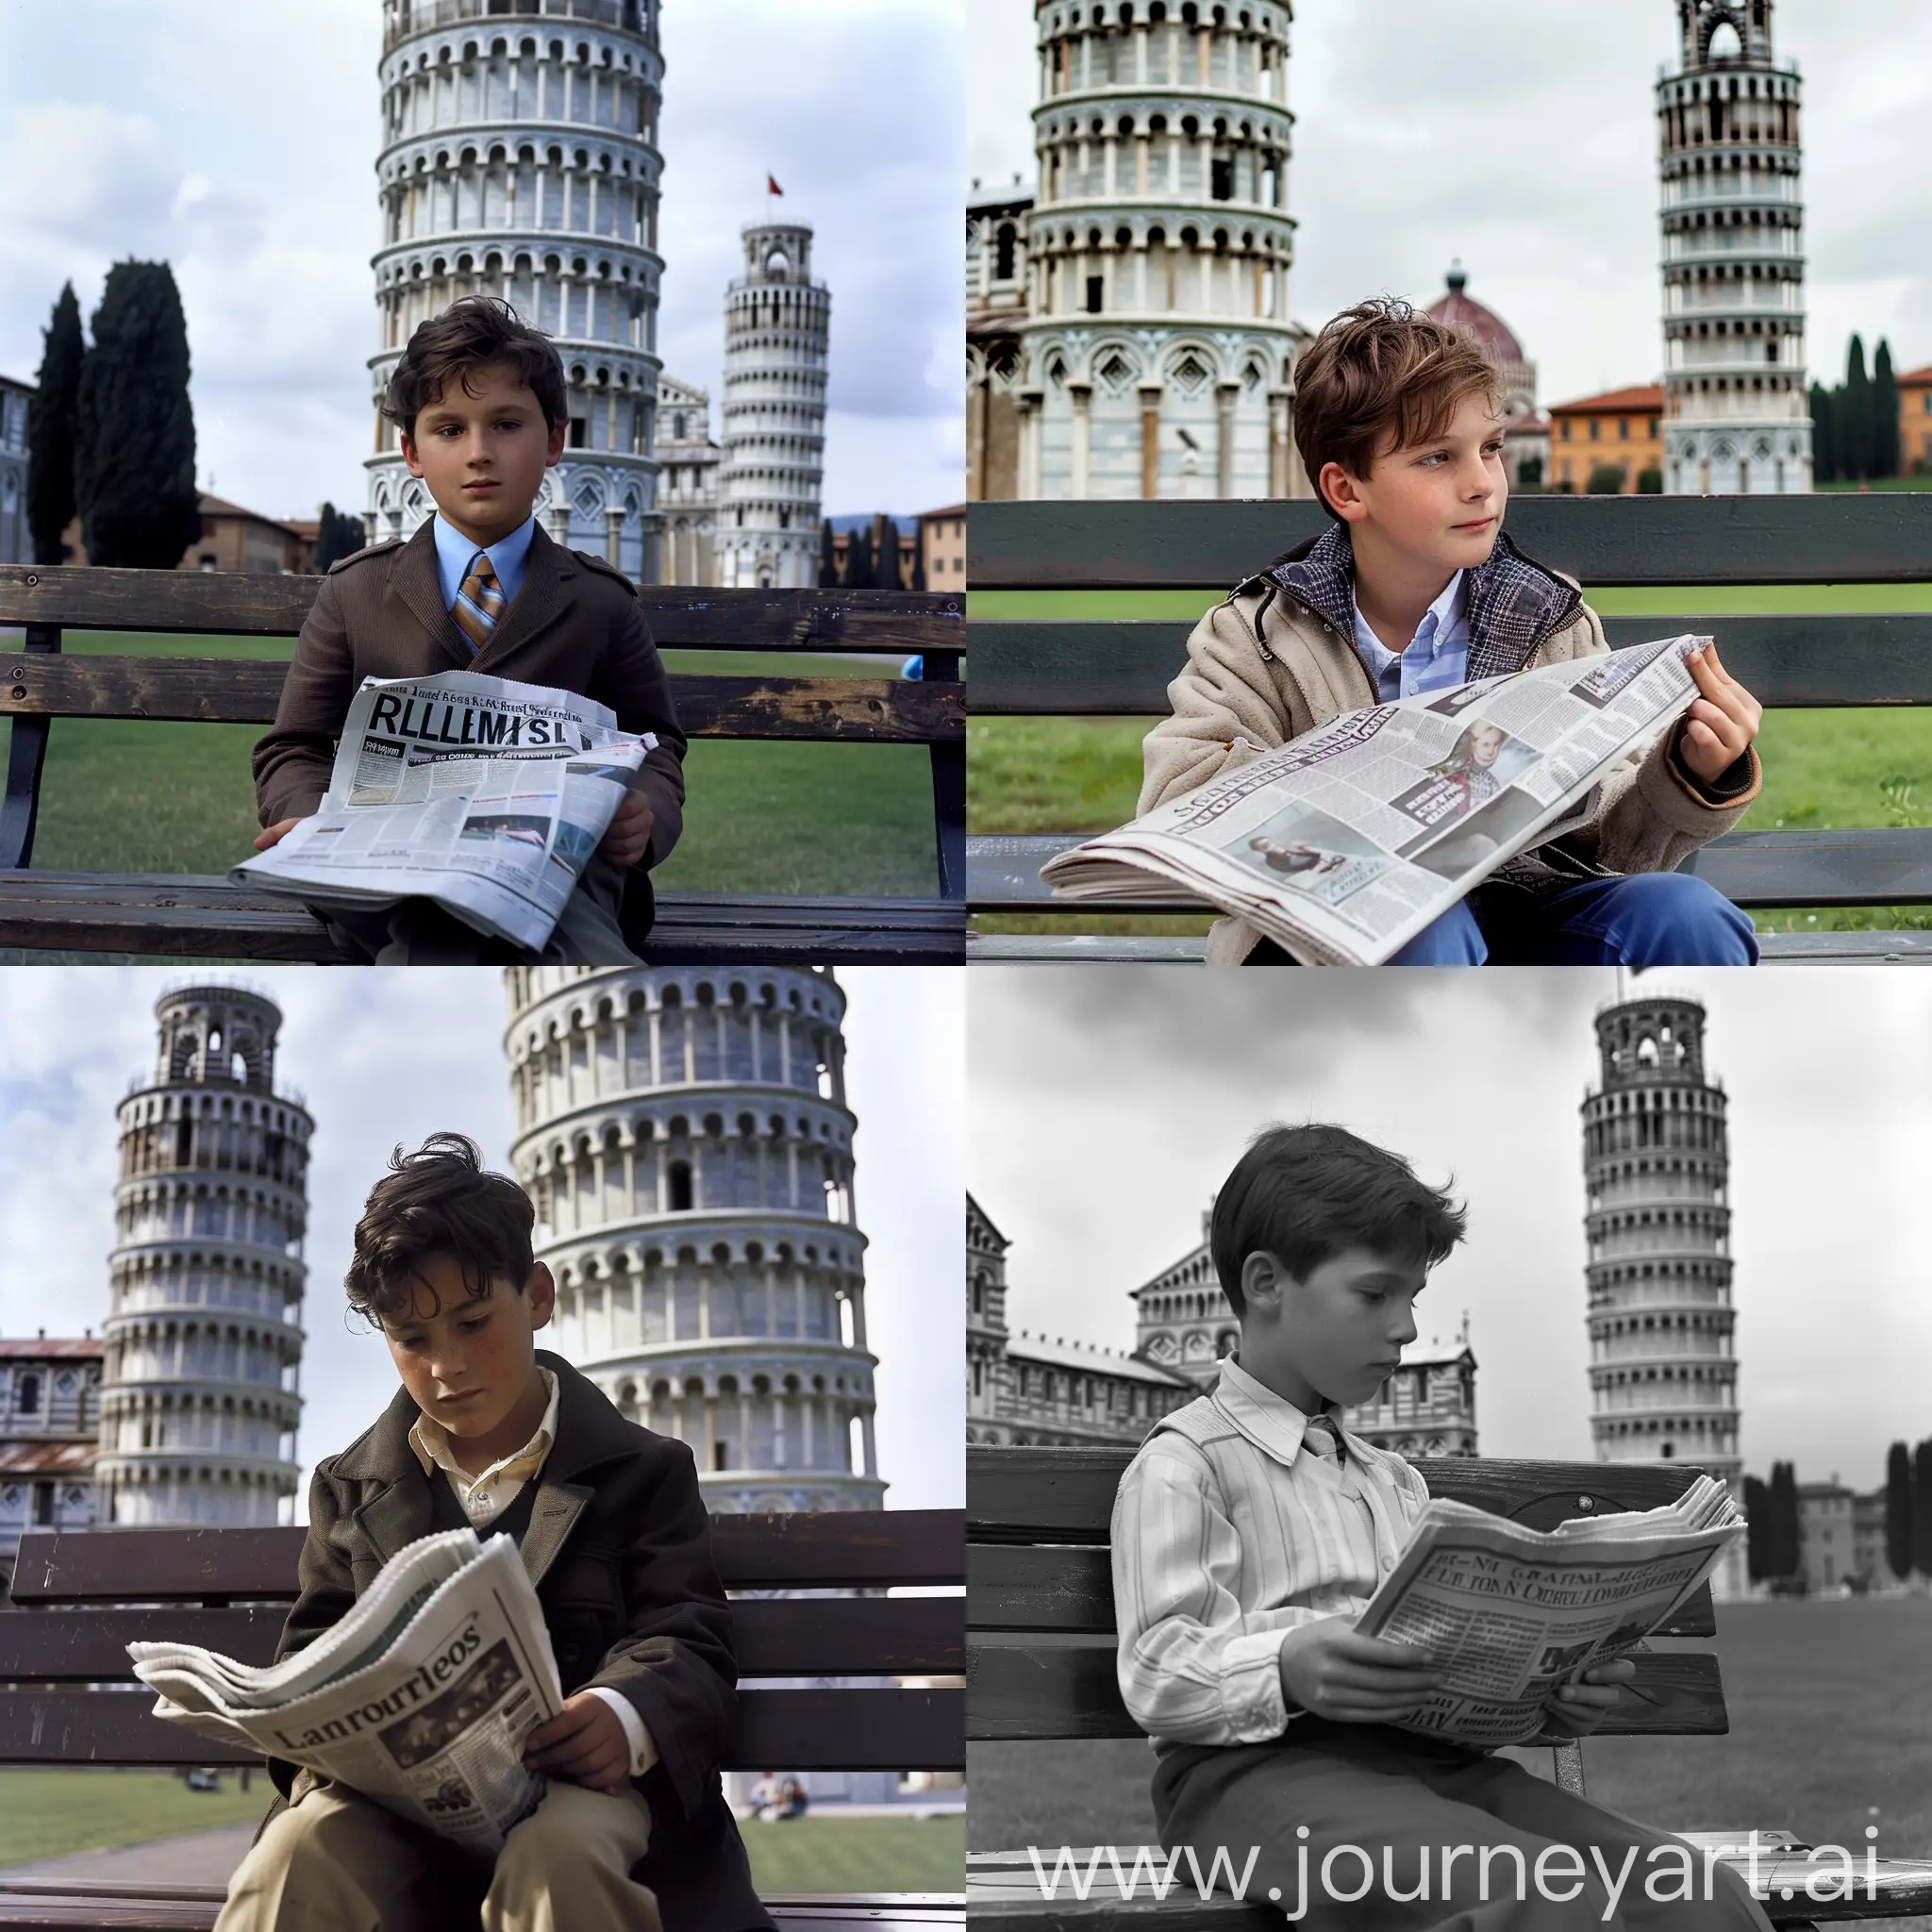 Schoolboy-Reading-Newspaper-by-the-Leaning-Tower-of-Pisa